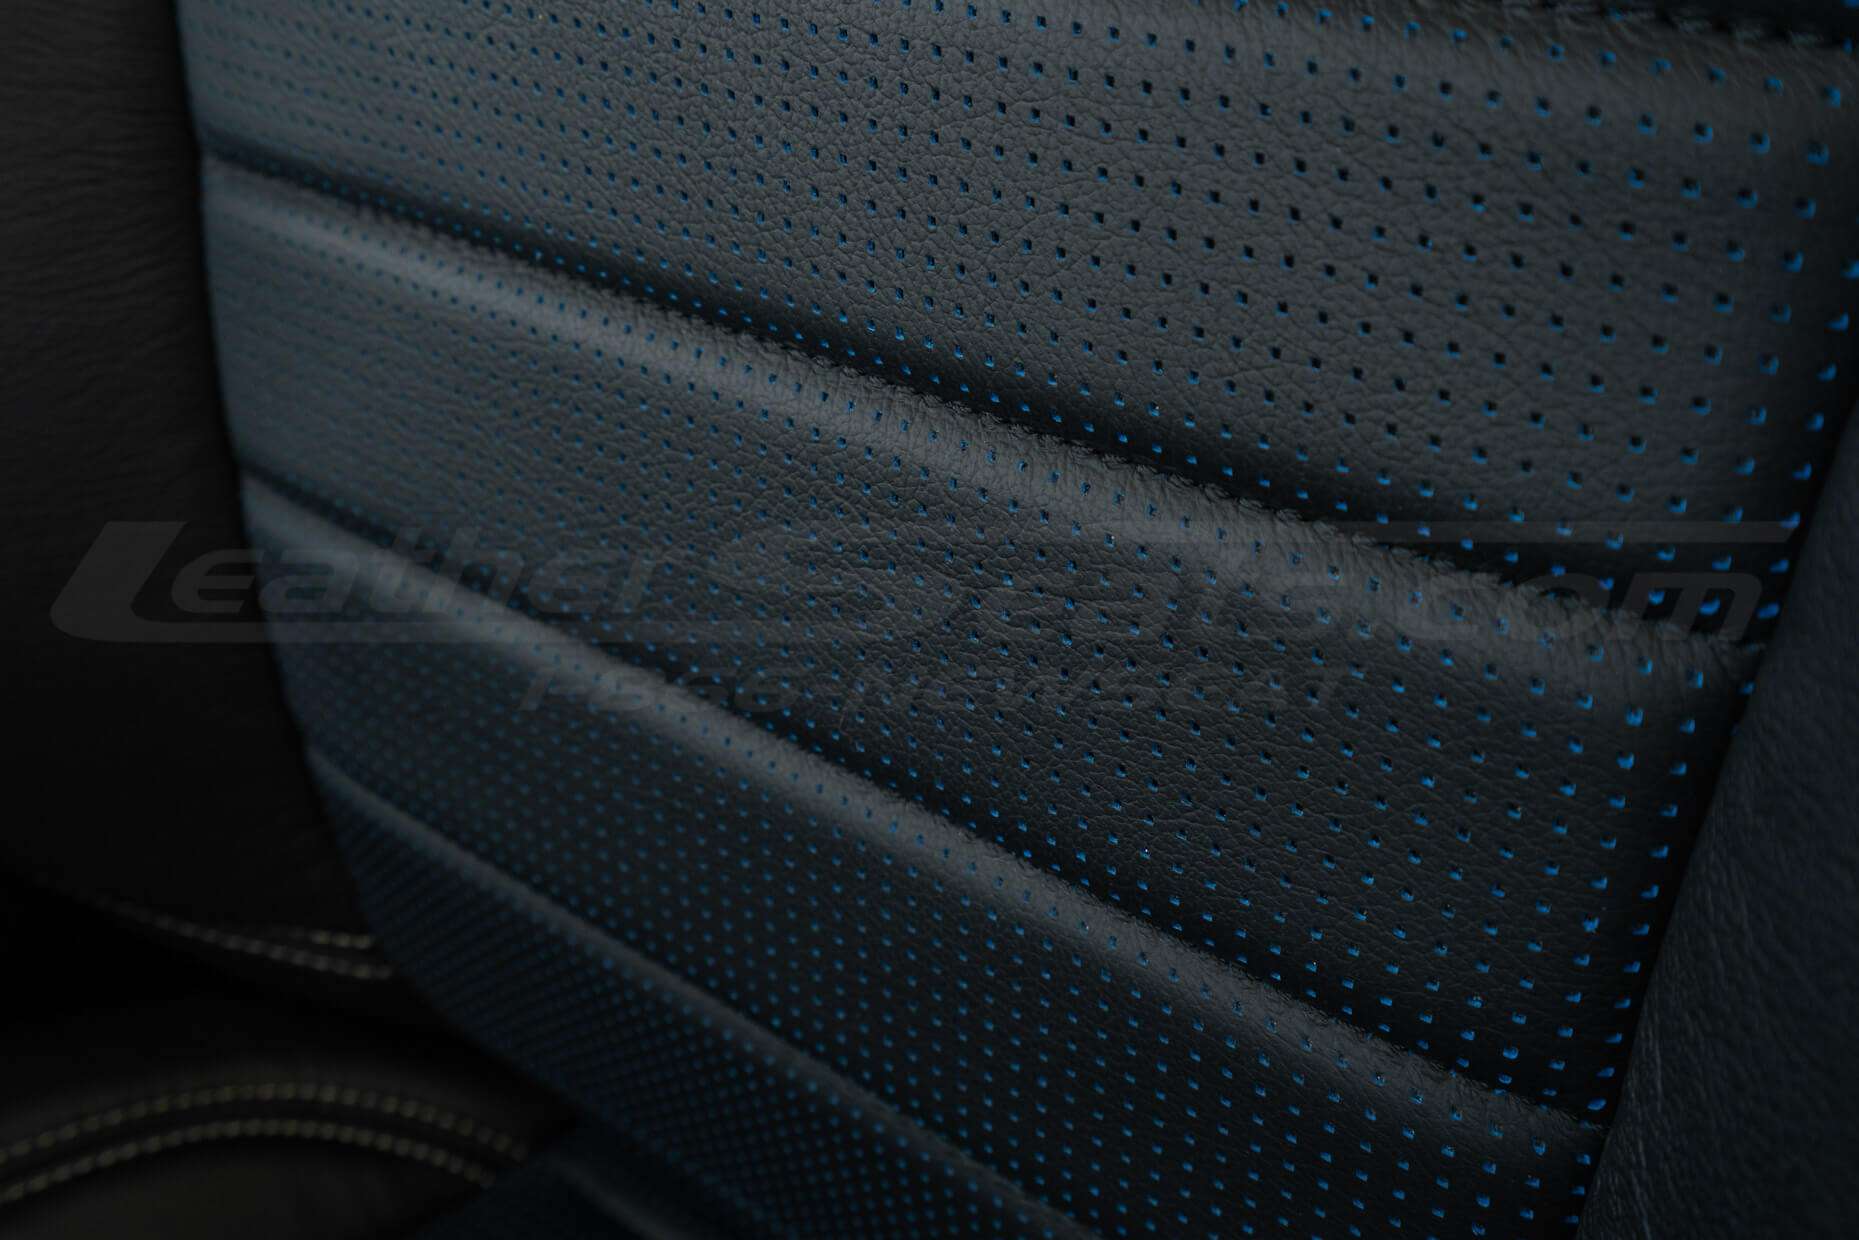 Piazza BLue Perforated Insert close-up